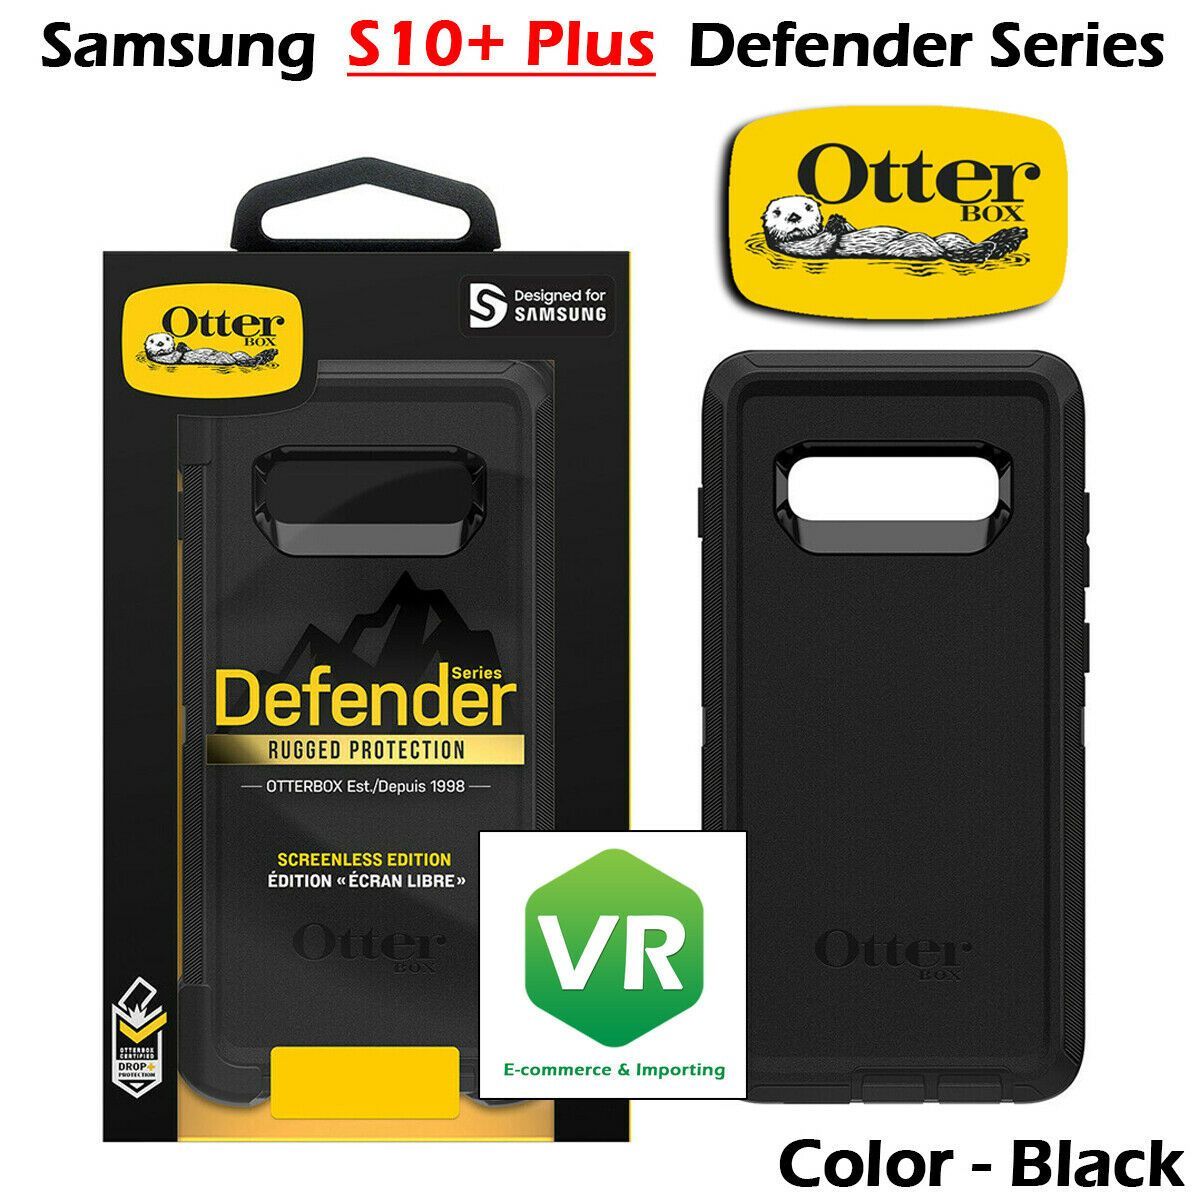 Absolute Toner OtterBox Samsung Galaxy S10+ Defender Series Screenless Edition Case SmartPhone